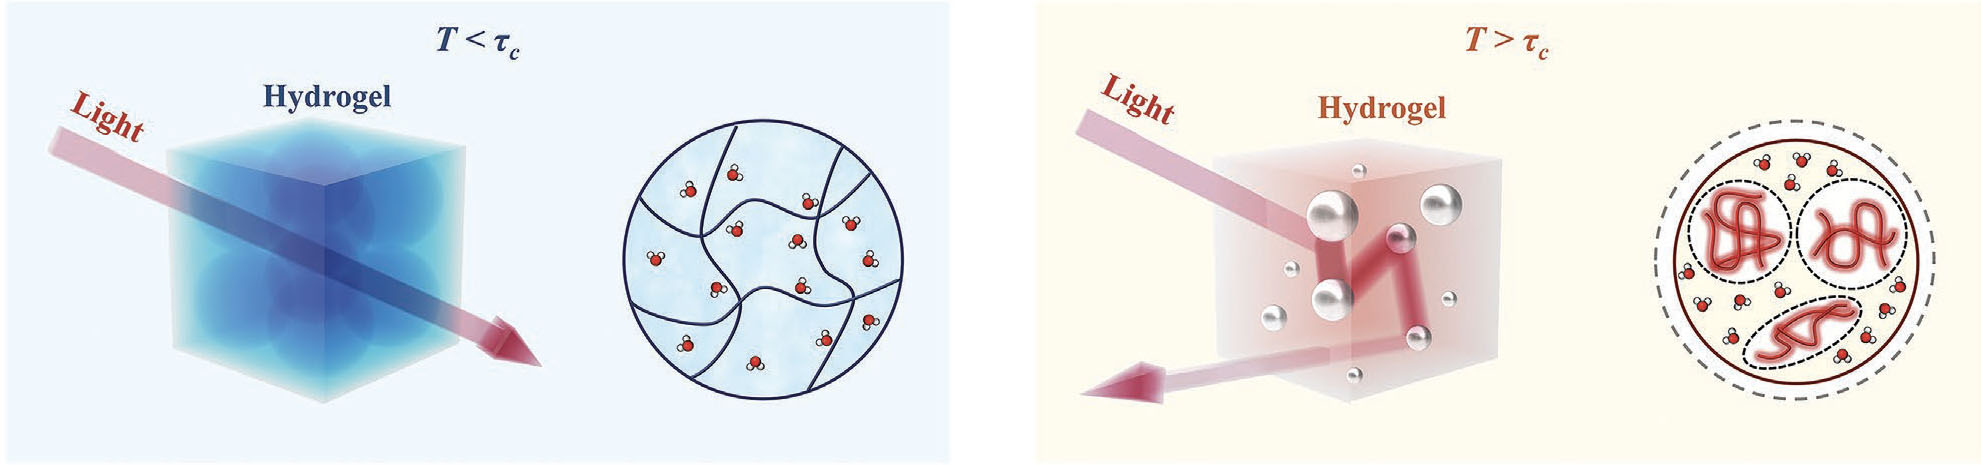 Proposed solar modulated thermochromic mechanism of PND hydrogel